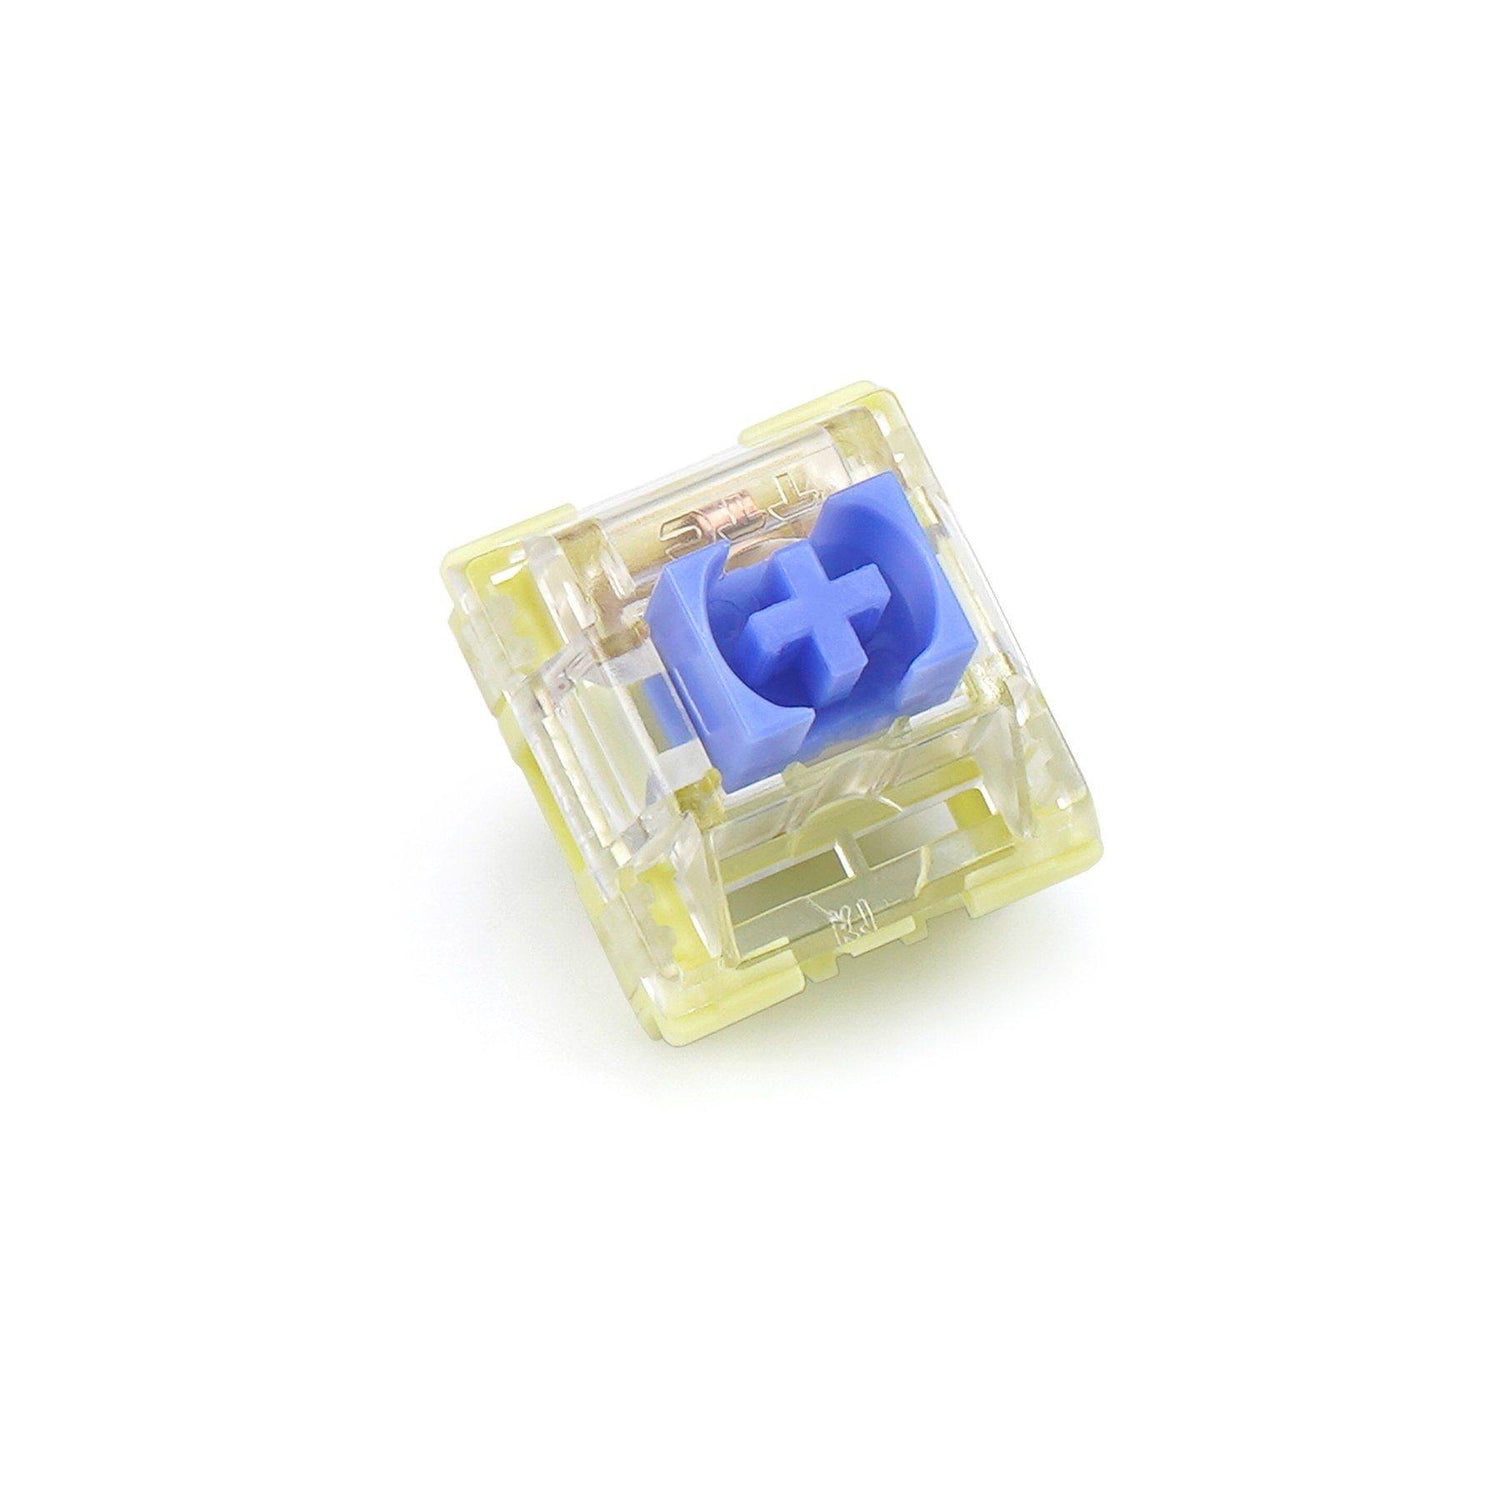 TTC BROTHER CLICKY SWITCHES - THE KEYCAP CLUB